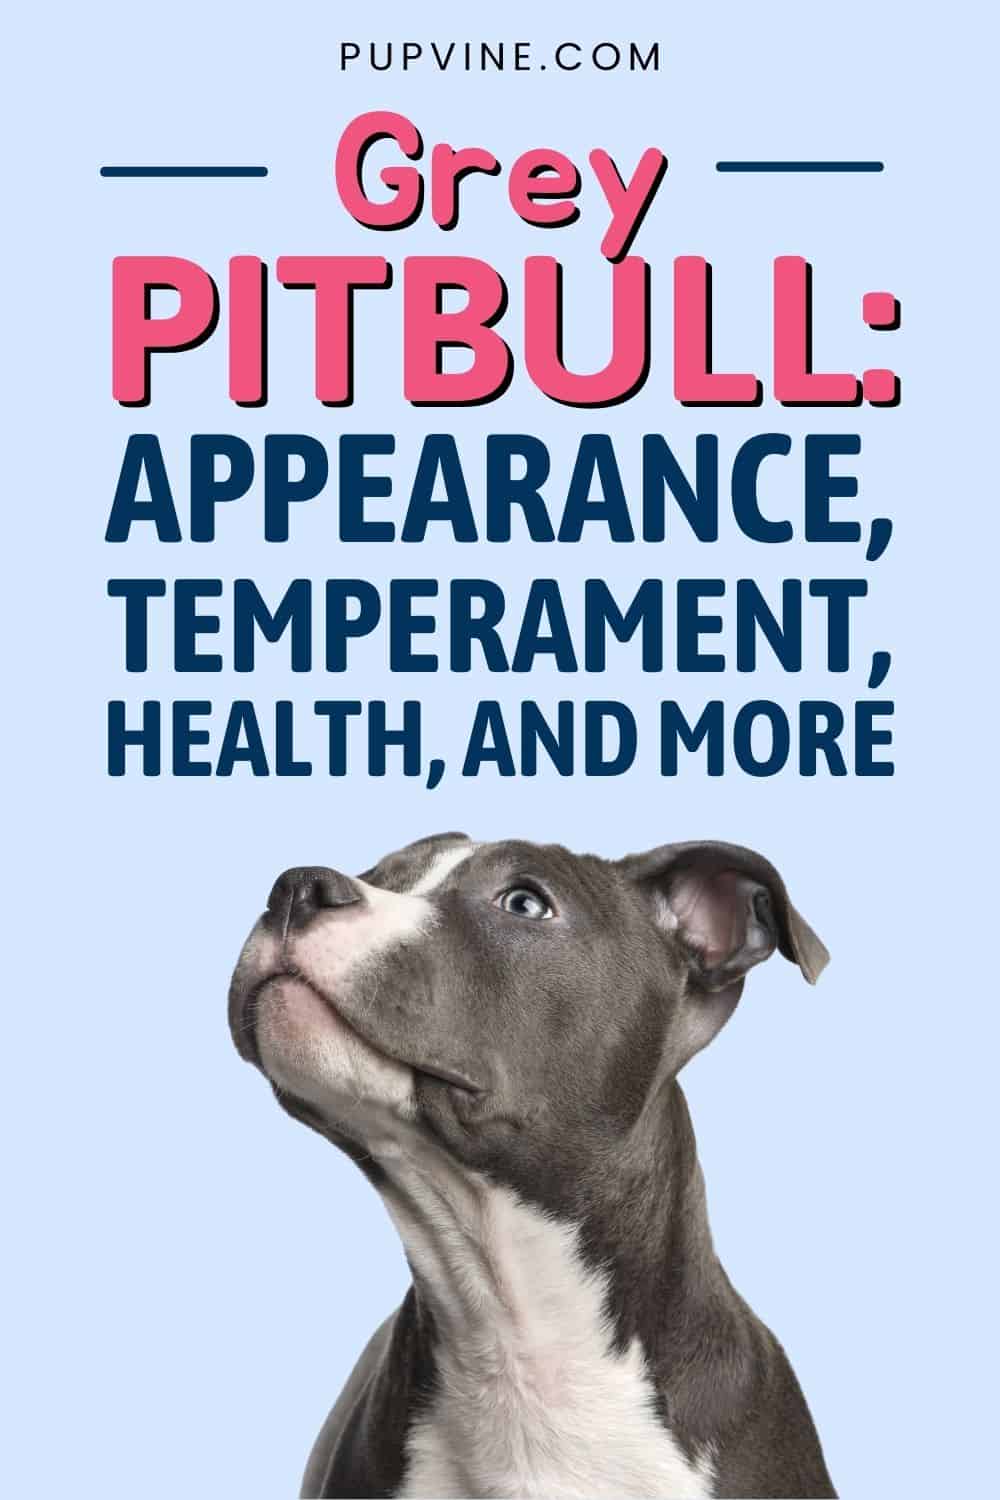 Grey Pitbull Appearance, Temperament, Health, And More!